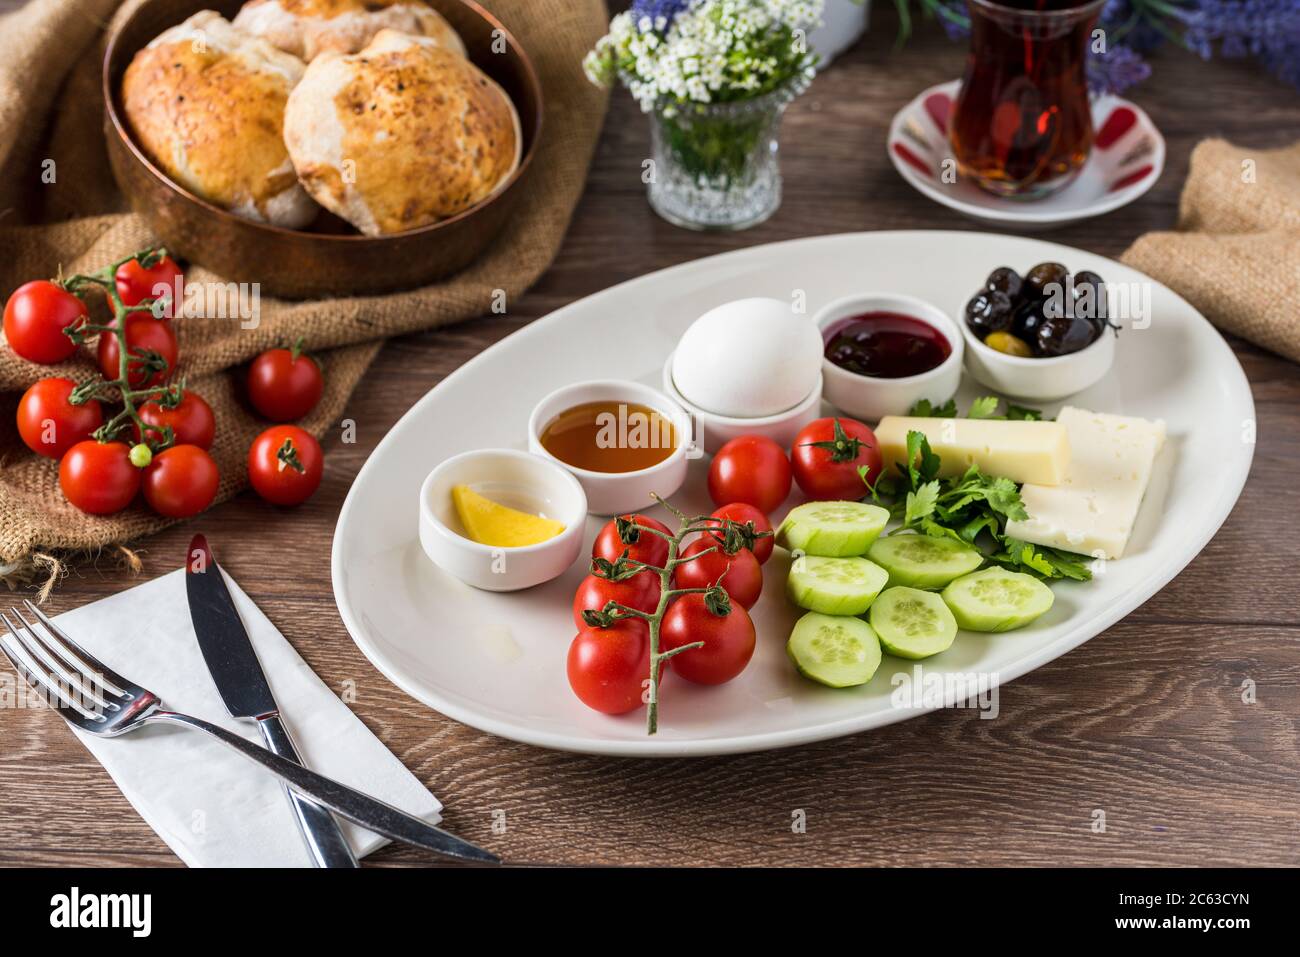 Delicious traditional turkish breakfast on table Stock Photo